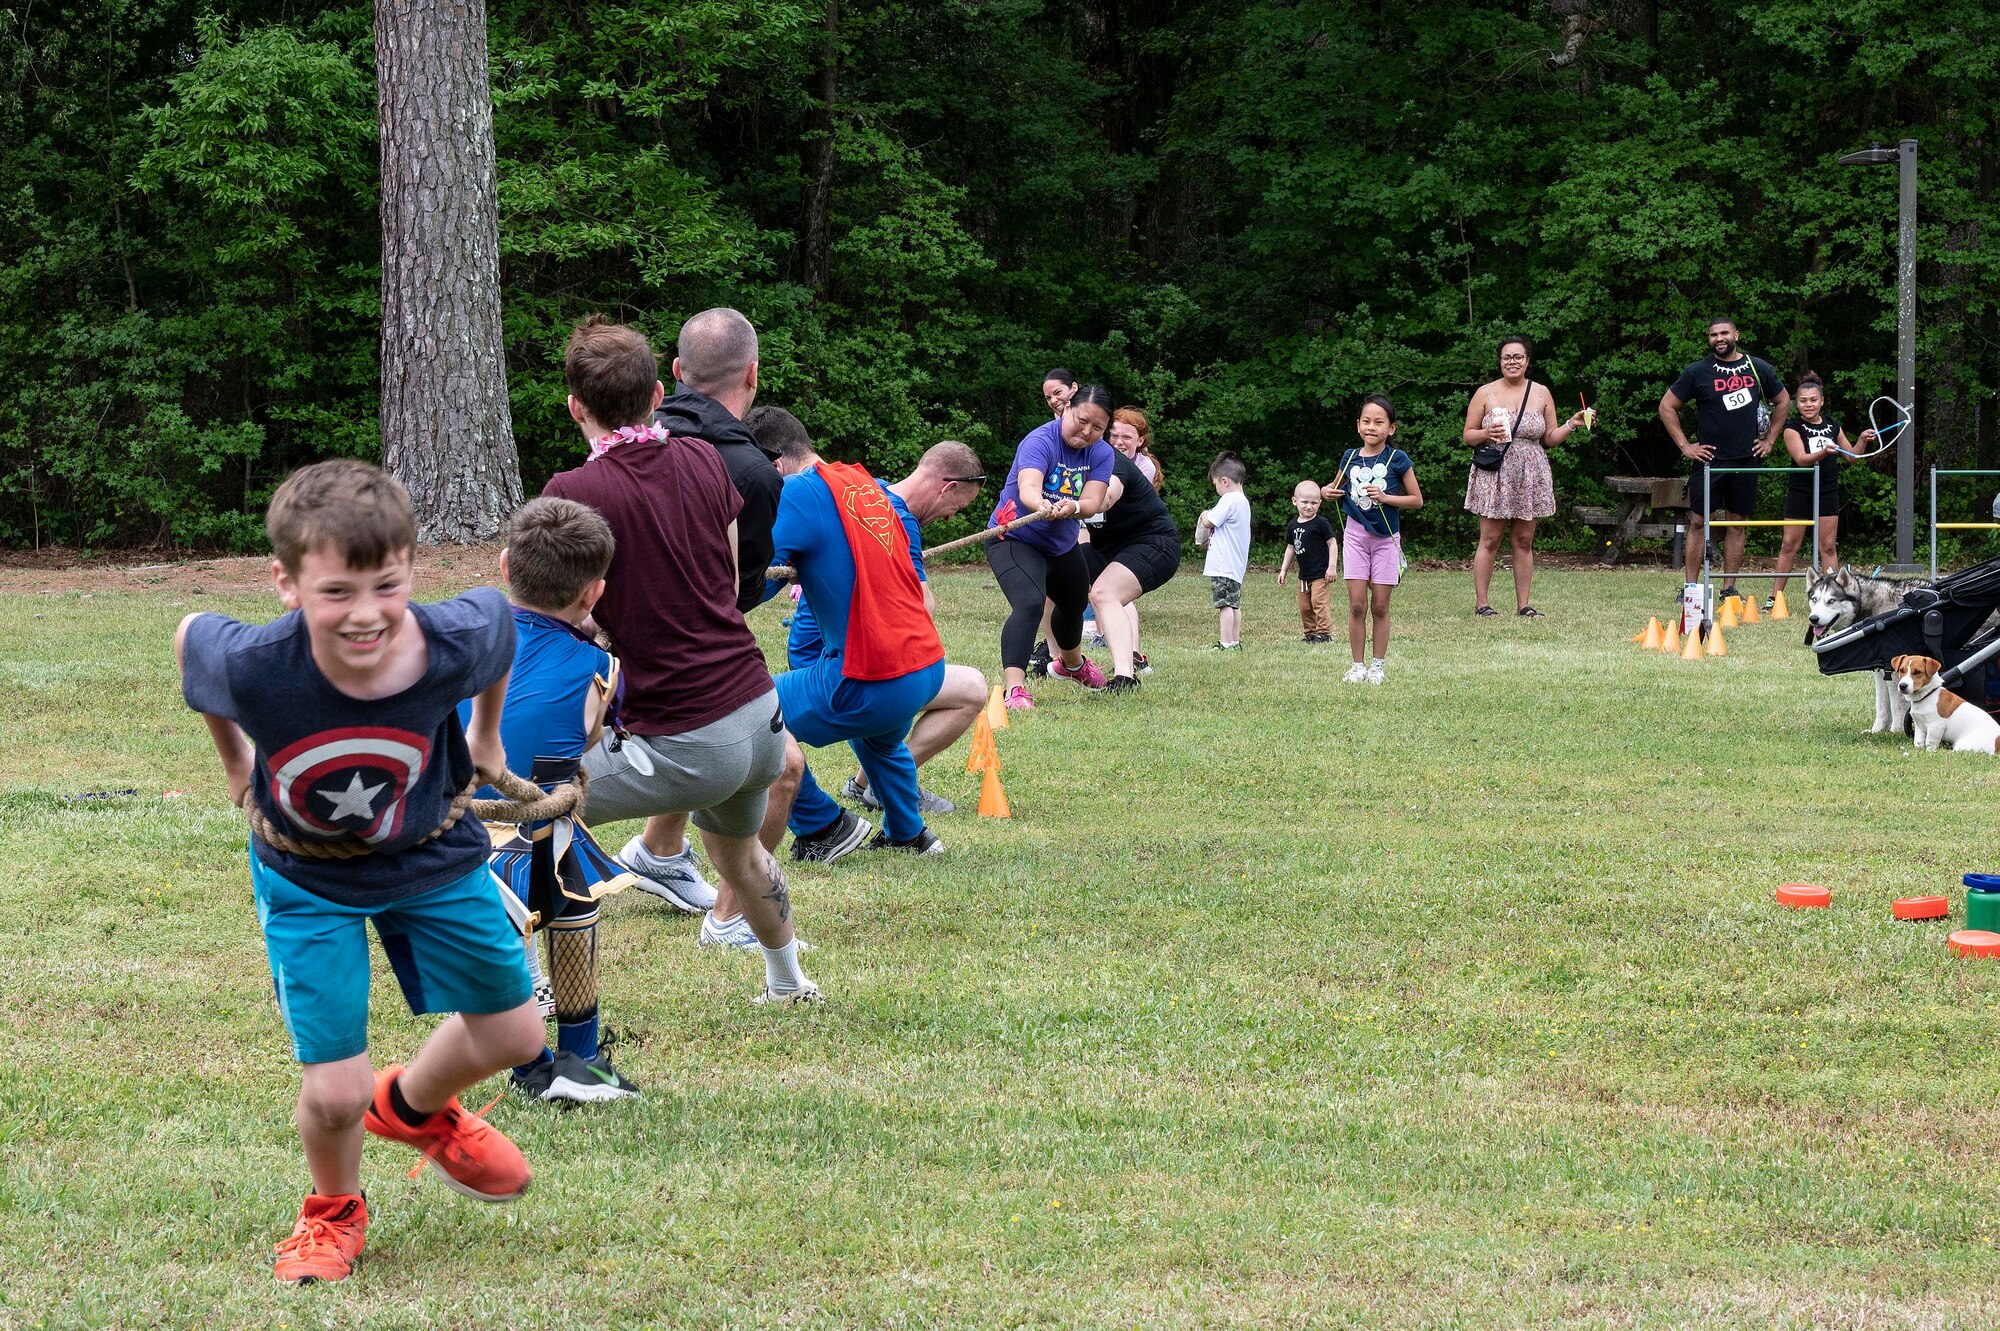 Children and their families participate in tug-of-war competition during a 5-kilometer walk and run event in observation of the Month of the Military Child at Seymour Johnson Air Force Base, North Carolina, April 22, 2023. Games and food were available for attendees, who were encouraged to dress in their favorite princess or superhero costume during the festivities. The event served as an opportunity for members of Seymour Johnson AFB to give back to military-connected children and recognize them for the role they play in the base community.